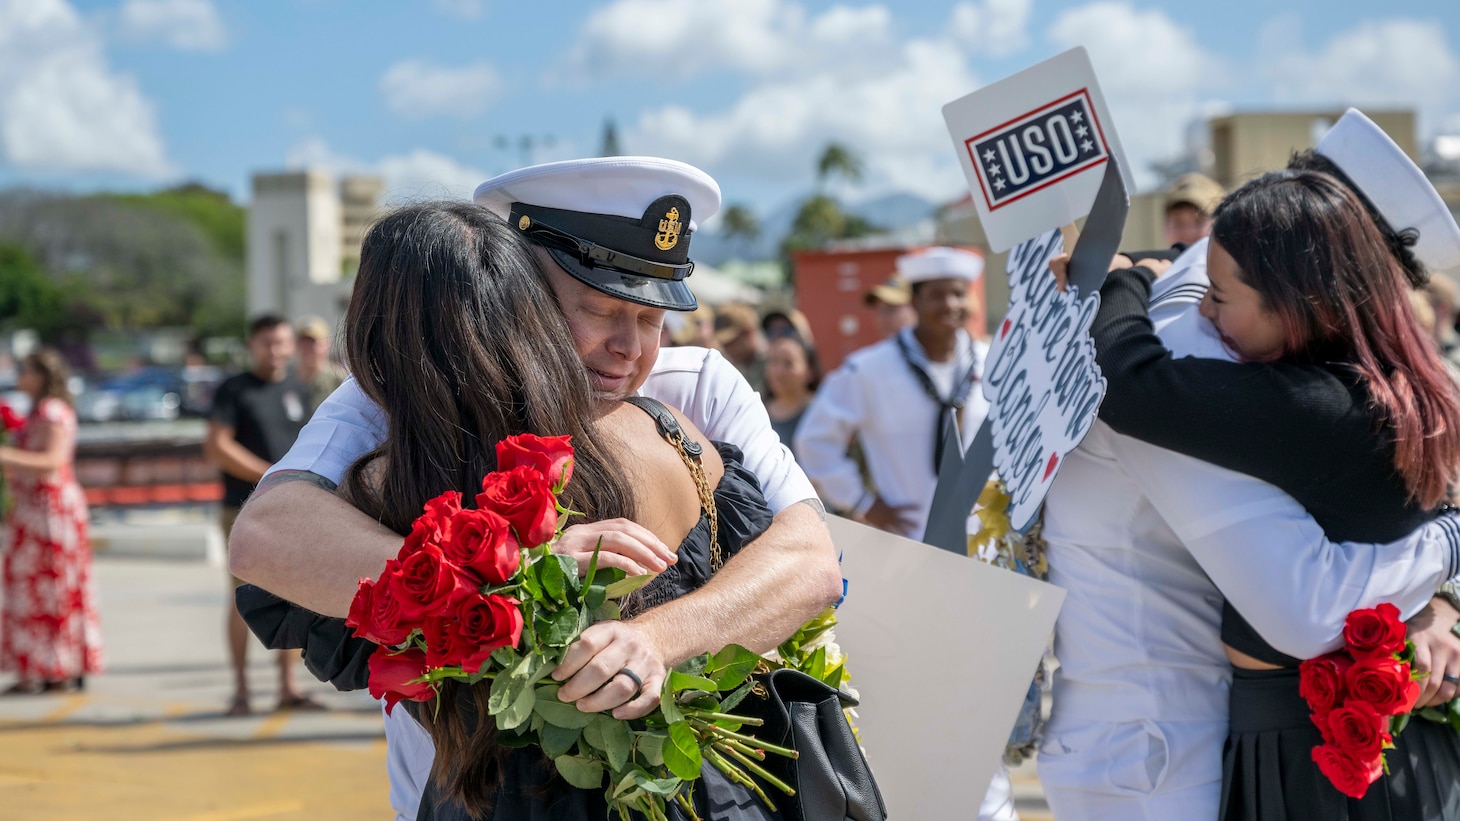 JOINT BASE PEARL HARBOR-HICKAM (Jan. 31, 2024) — Sailors embrace their loved ones during the homecoming of the Virginia-class fast-attack submarine USS North Carolina (SSN 777) on Joint Base Pearl Harbor-Hickam, Jan. 31, 2024. USS North Carolina is the fourth submarine of the Virginia-class; the first class designated and built post-Cold War in order to meet the challenges of the 21st century, and has improved stealth; sophisticated surveillance capabilities, and special warfare enhancements that enable it to meet the Navy's multi-mission requirements.  (U.S. Navy photo by Mass Communication Specialist 1st Class Scott Barnes)